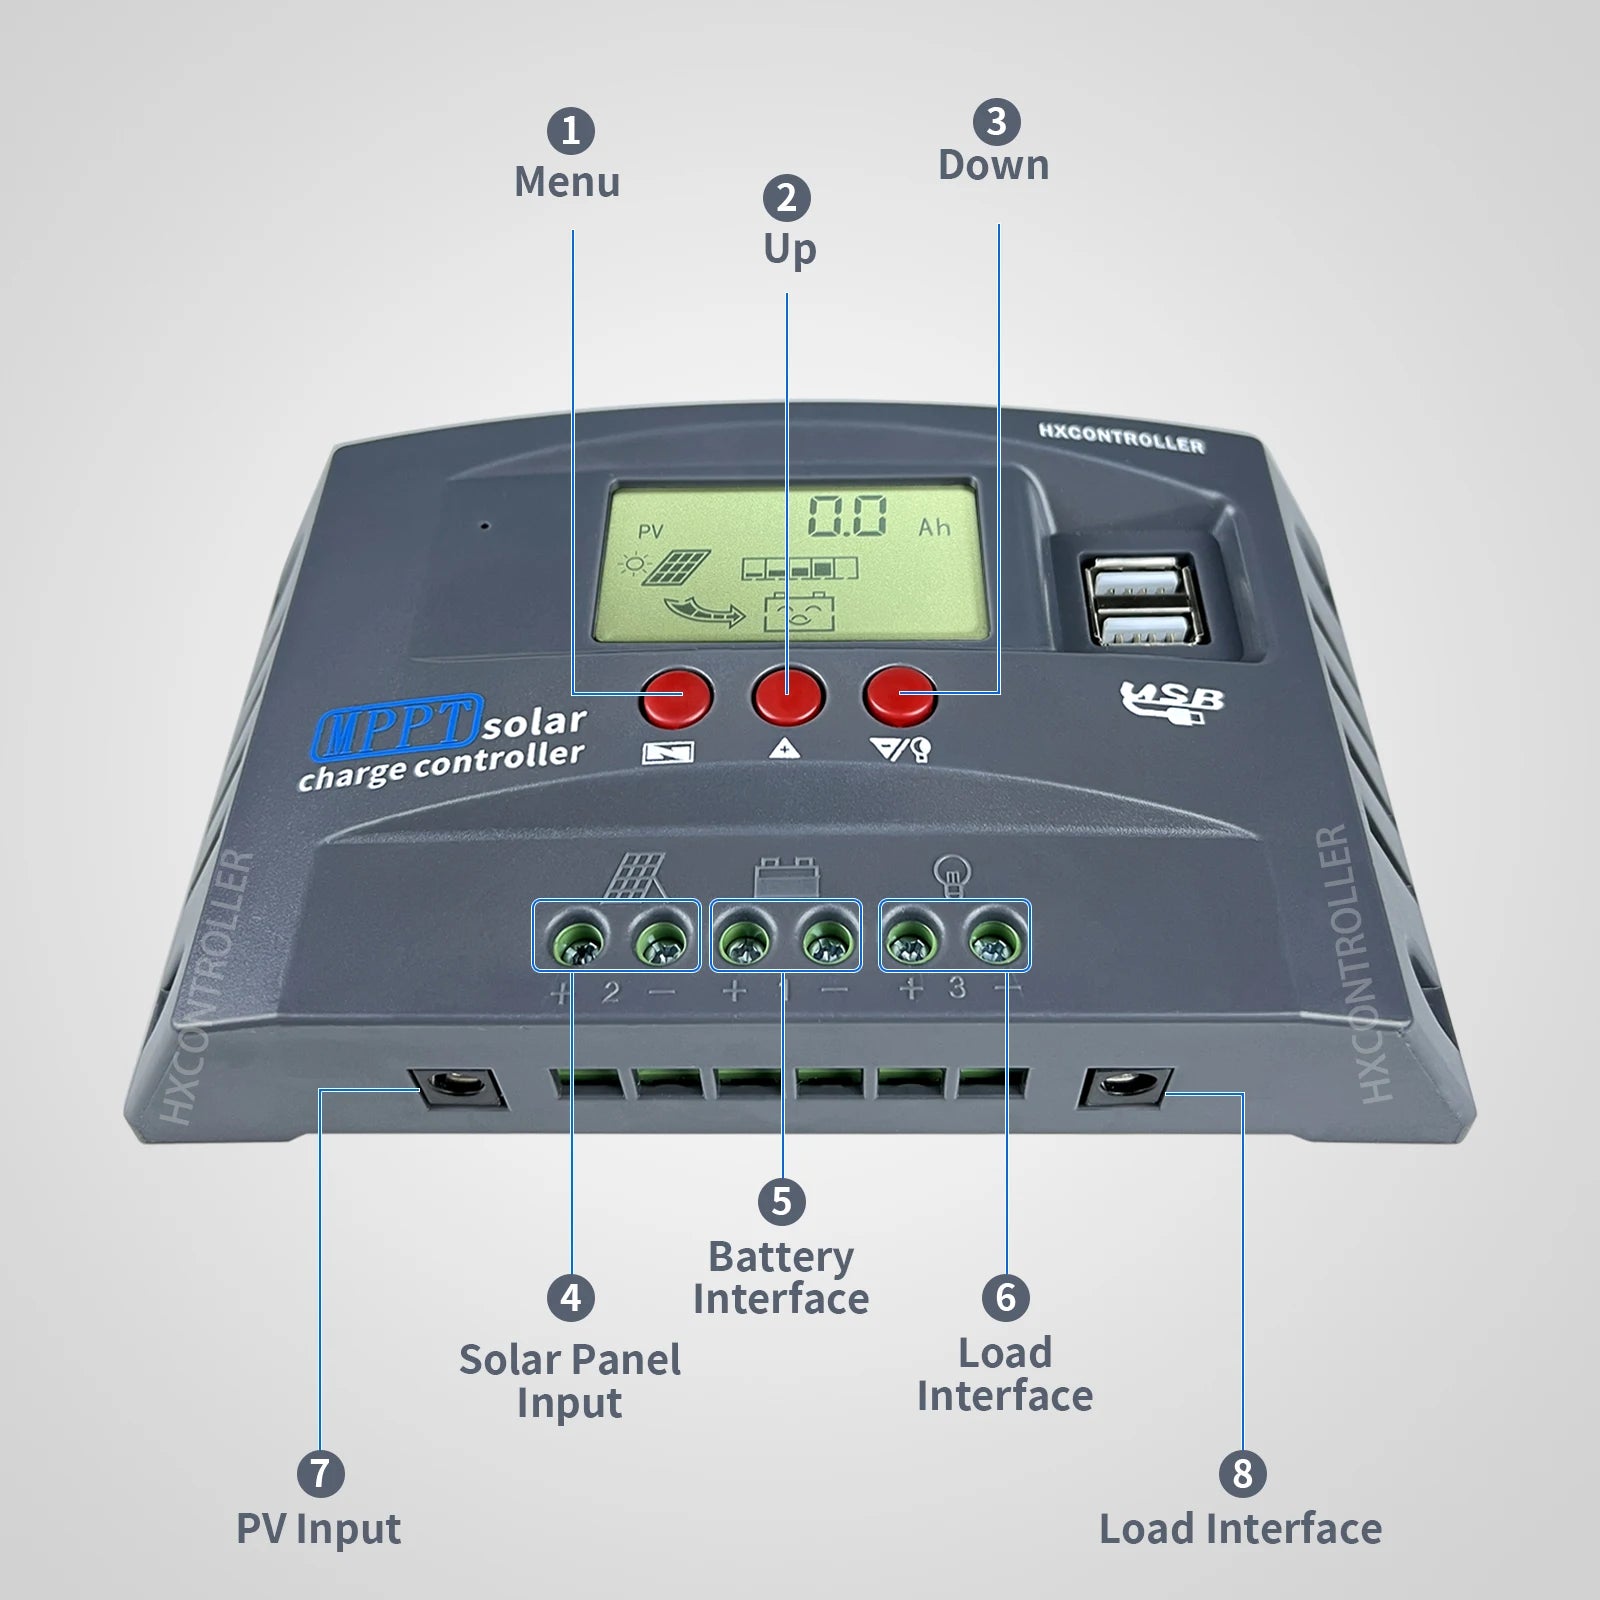 MPPT 720W 480W 360W 240W Solar Charge Controller, Smart solar charge controller with menu, buttons, and display for monitoring solar power and battery levels.